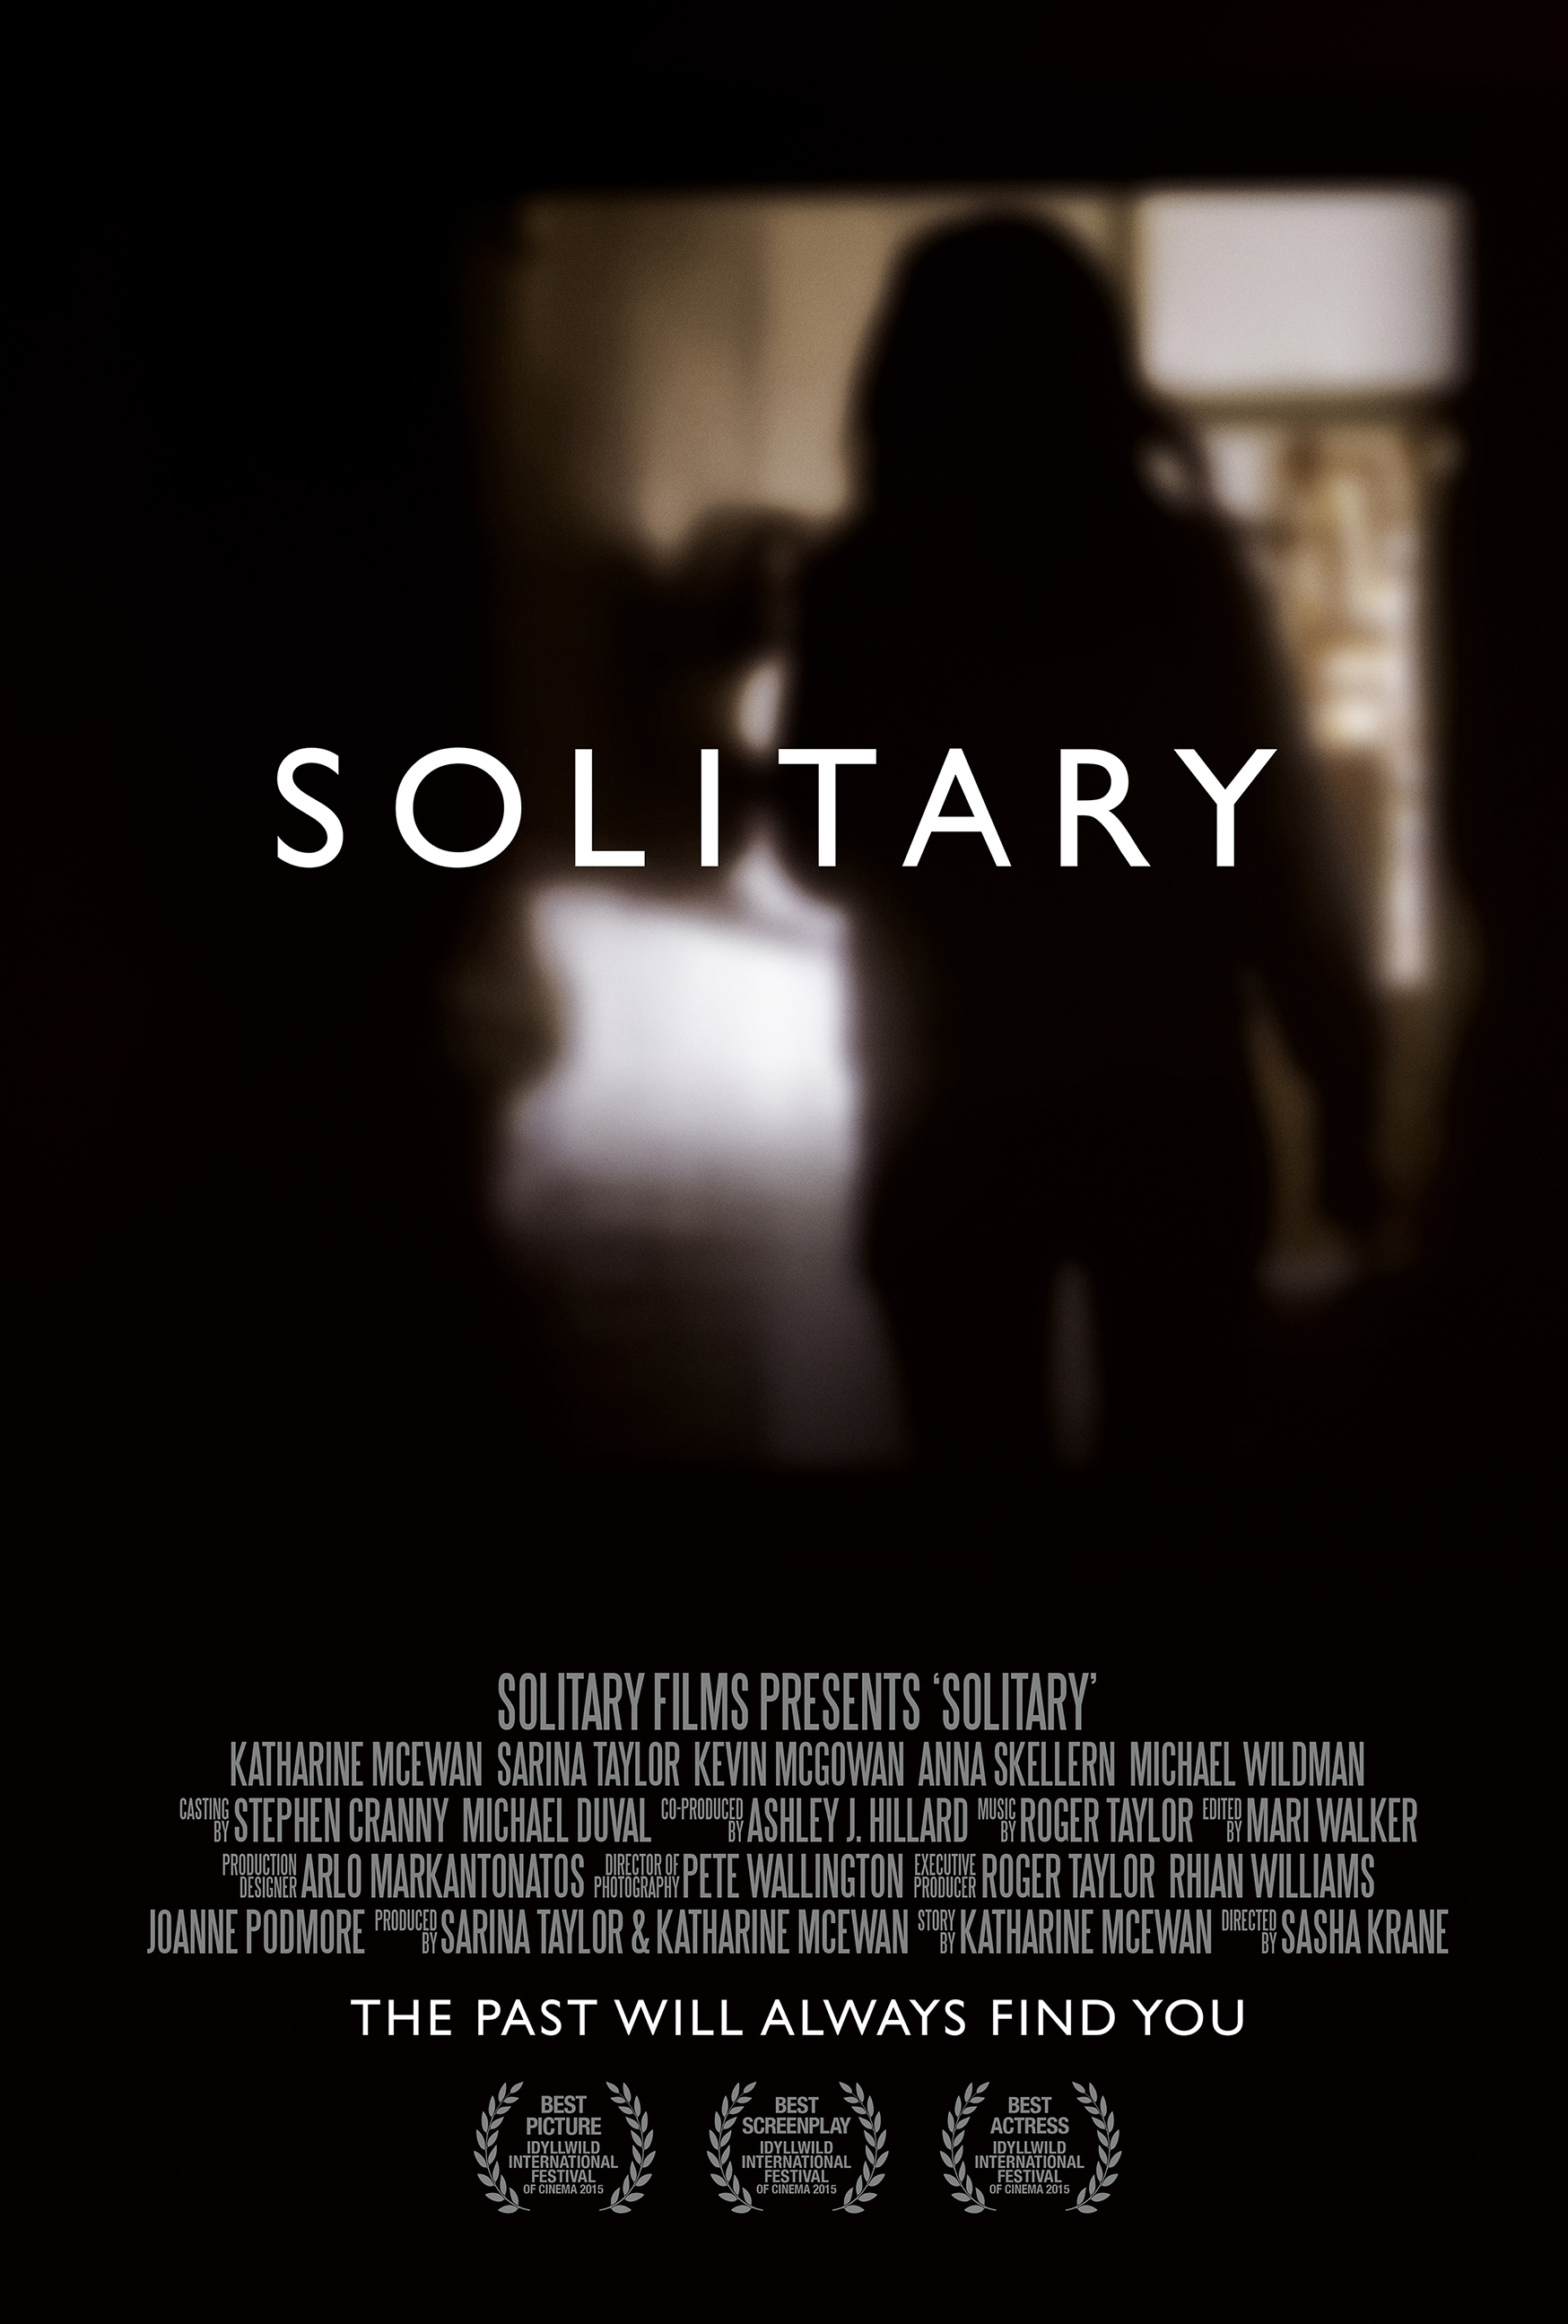 Artwork for the multi-award winning feature film SOLITARY